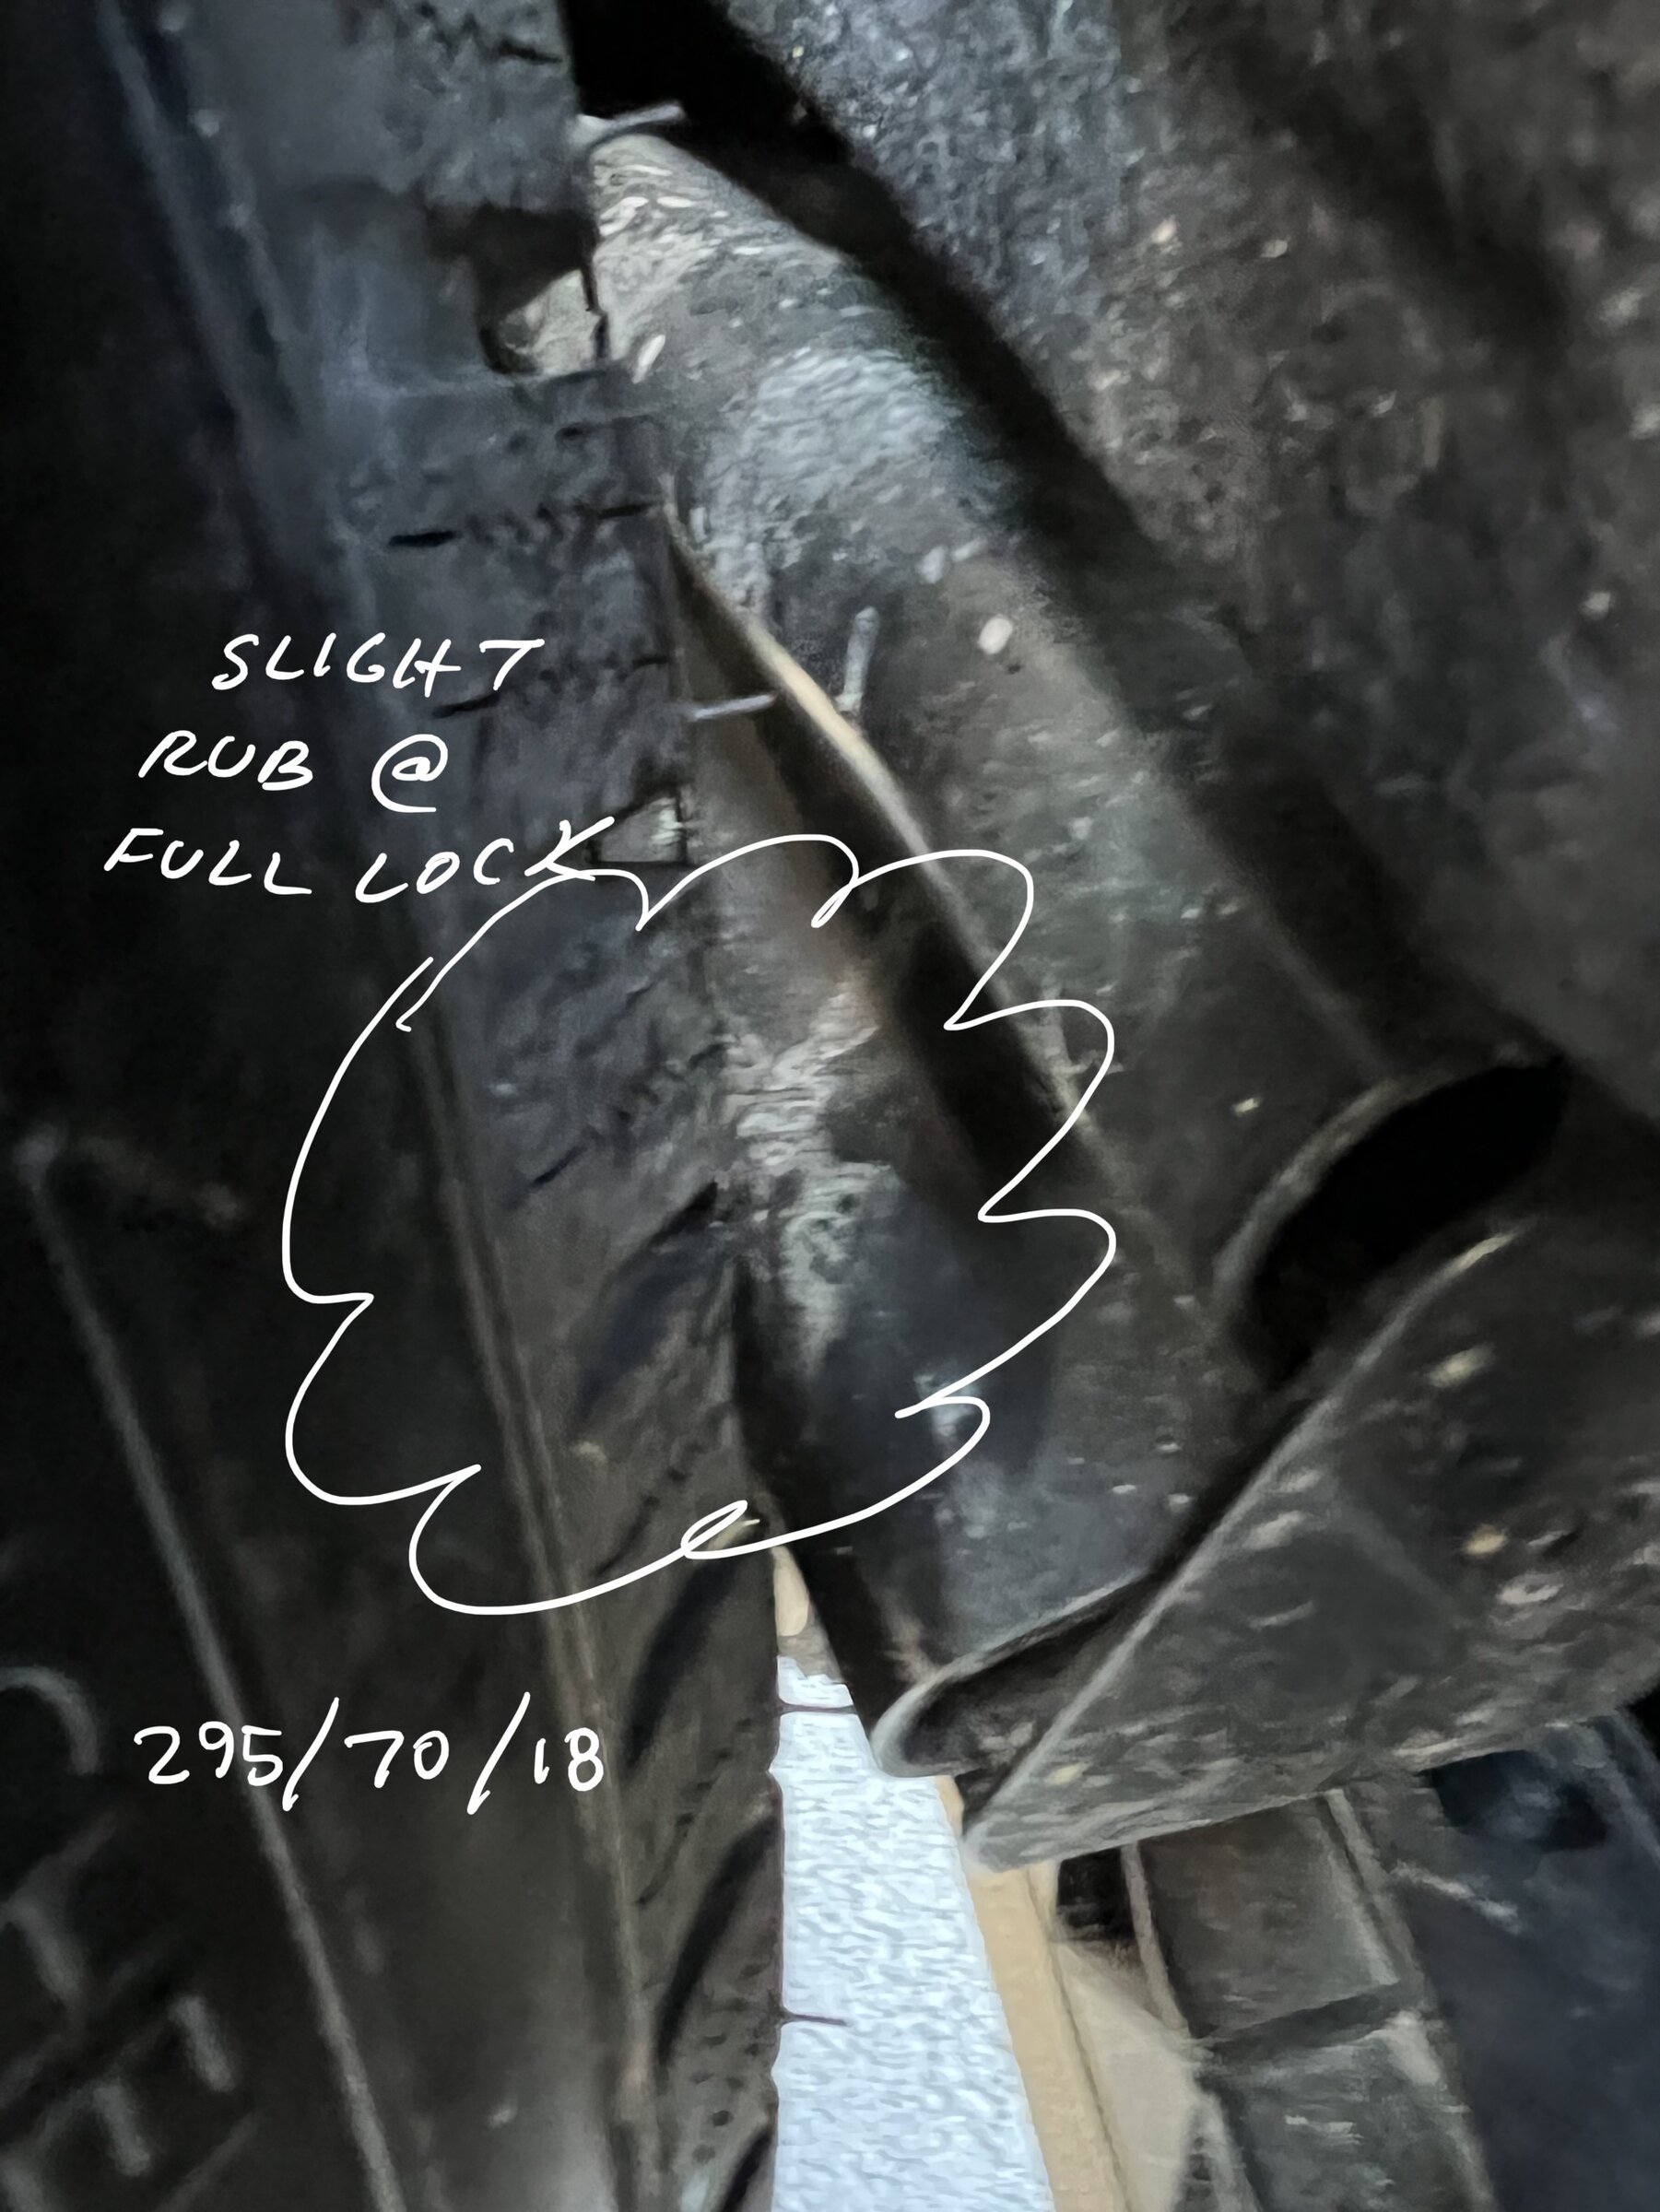 Ford F-150 Biggest Wheels & Tires Possible on Stock 2021 F150 (Without Level) IMG-9278